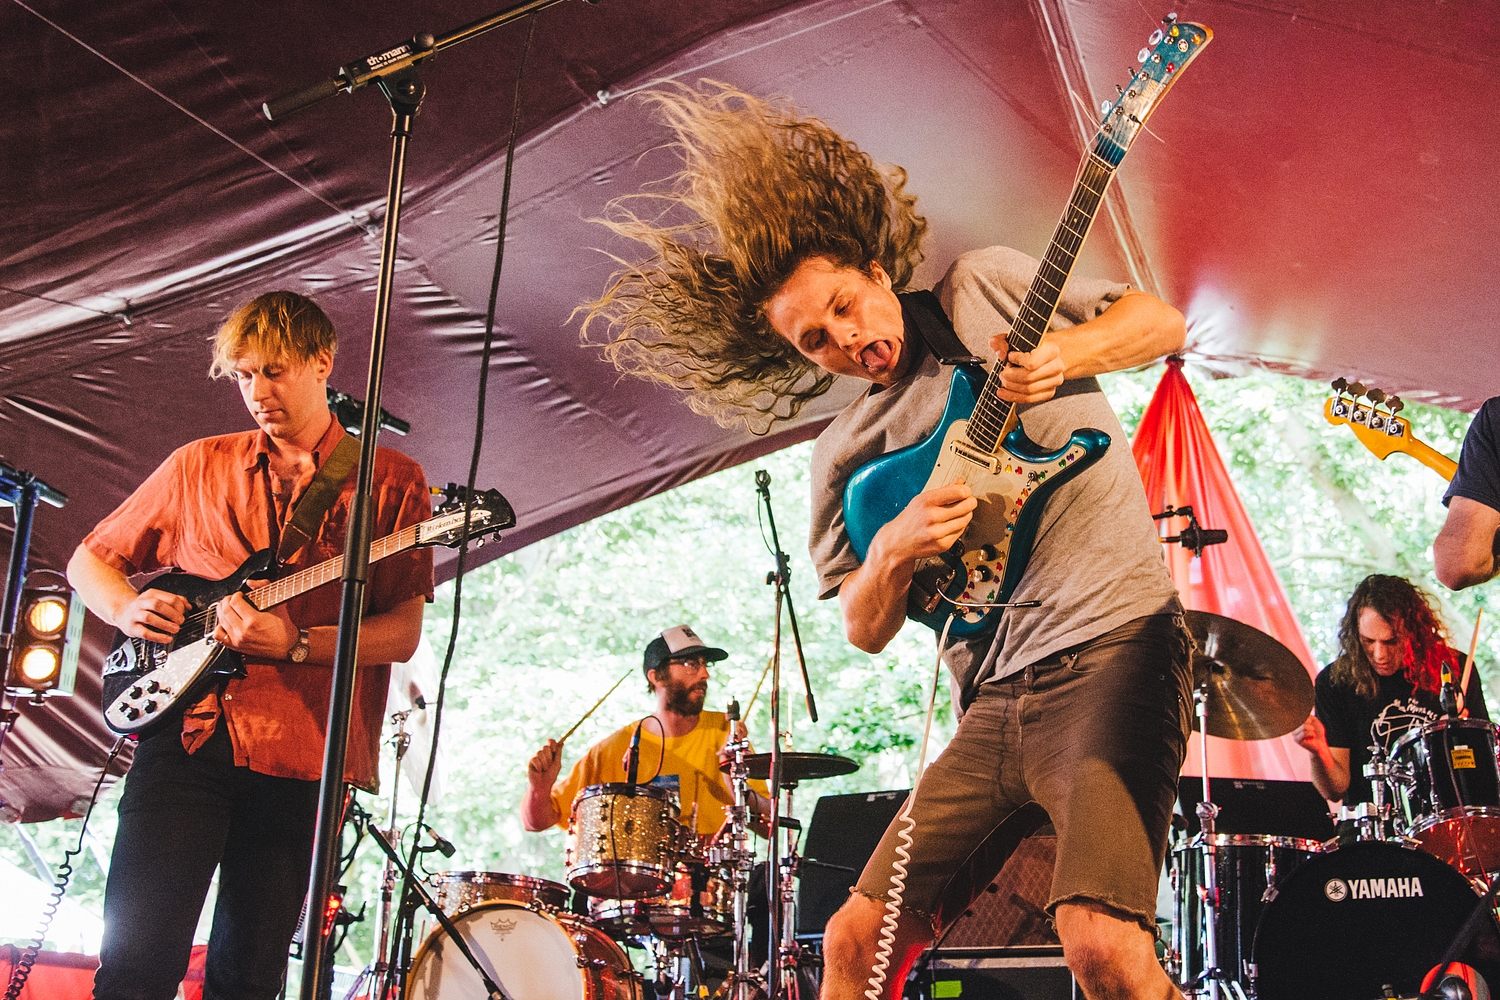 King Gizzard & The Lizard Wizard’s vicious psychedelia takes root in the Latitude 2015 woods